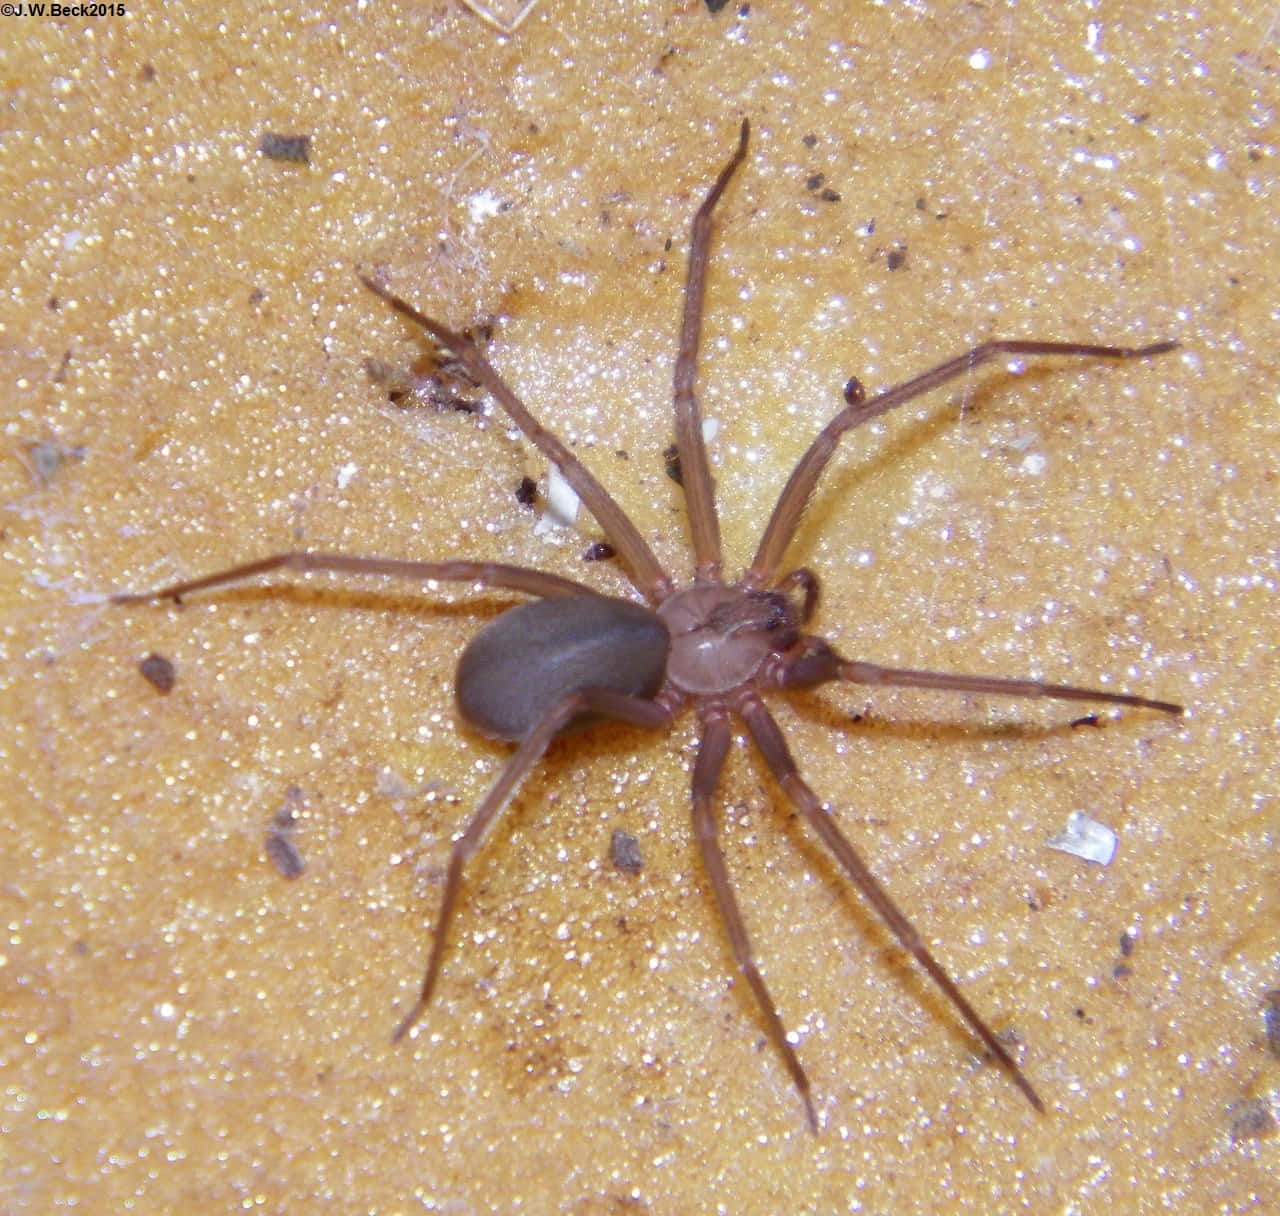 Close-up of a Brown Recluse Spider on a textured surface. Wallpaper